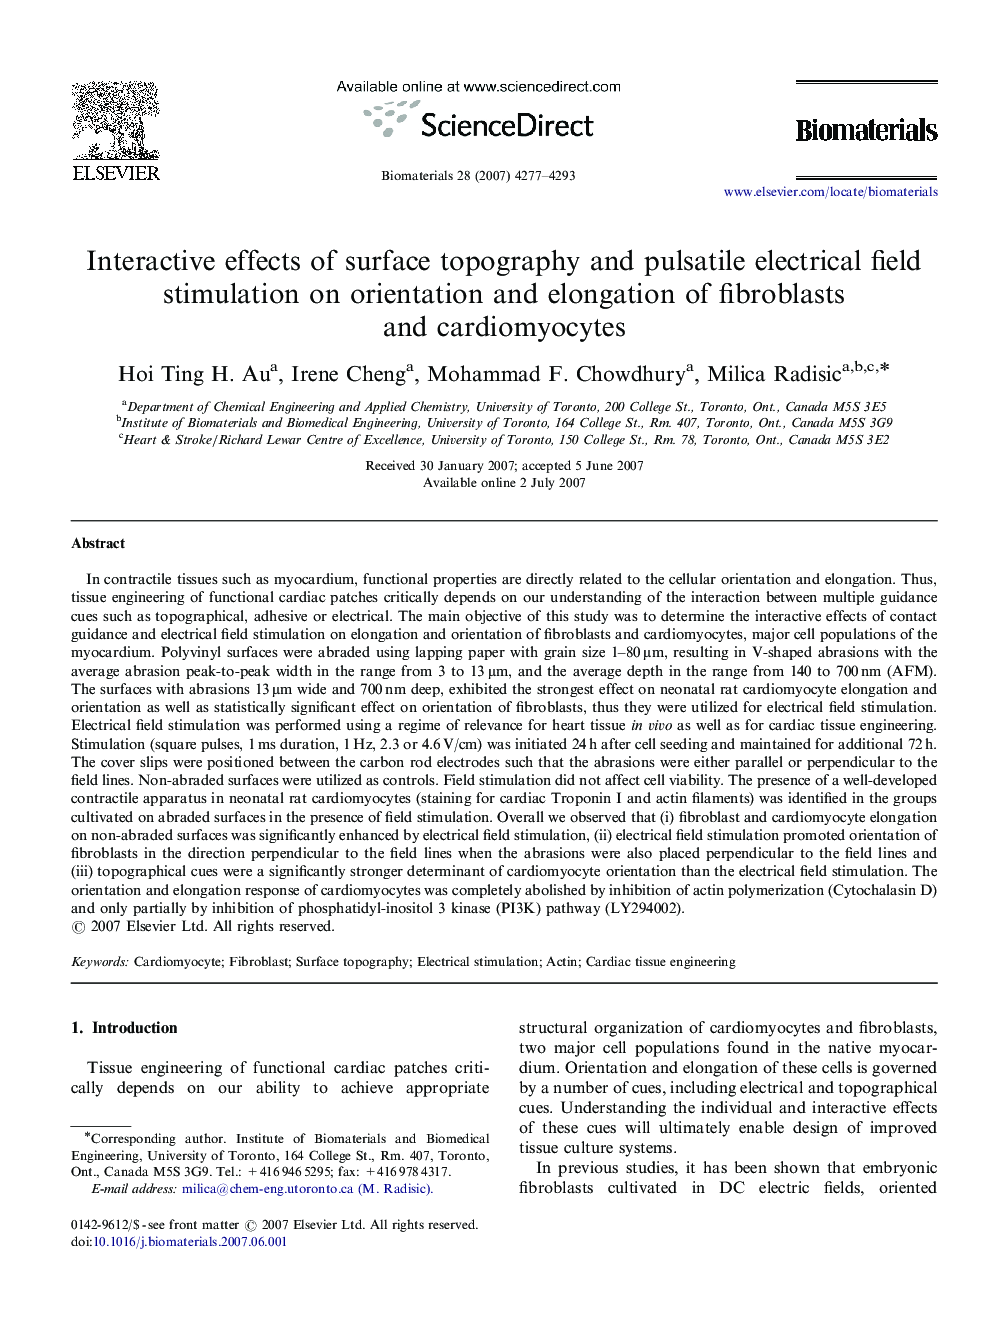 Interactive effects of surface topography and pulsatile electrical field stimulation on orientation and elongation of fibroblasts and cardiomyocytes